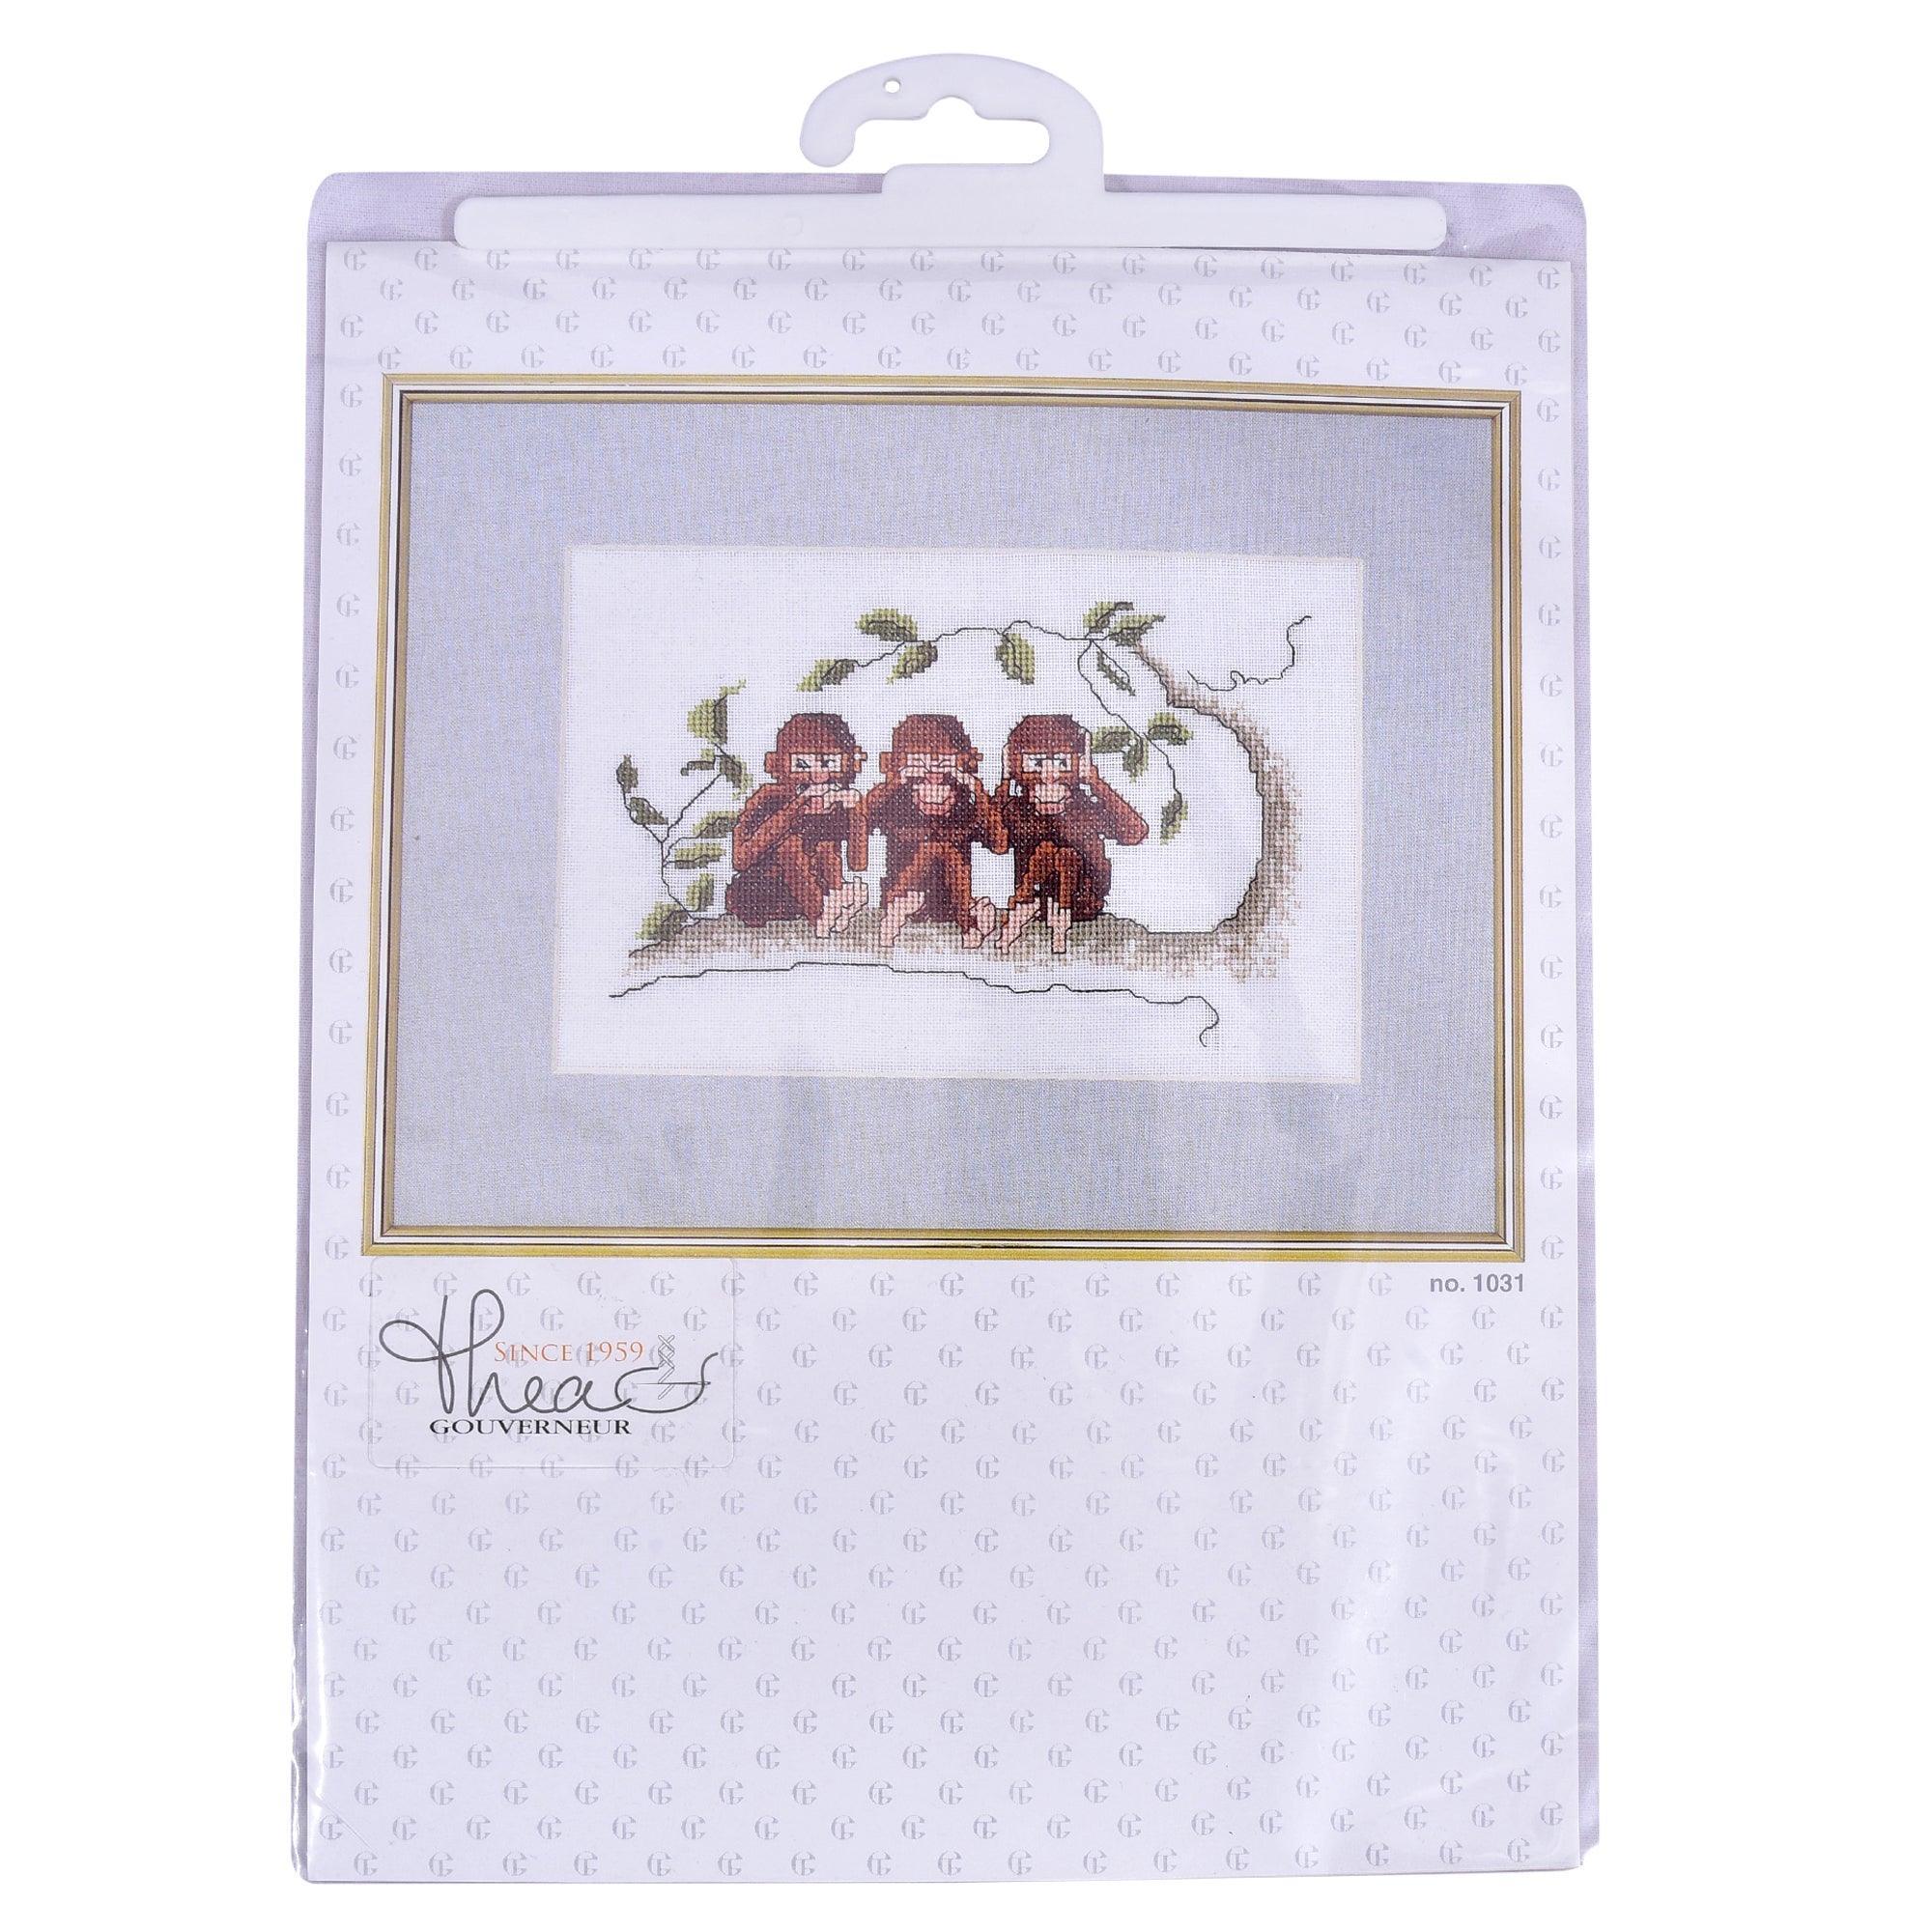 Thea Gouverneur - Counted Cross Stitch Kit - Three Wise Monkeys - Aida - 16 count - 1031A - Thea Gouverneur Since 1959